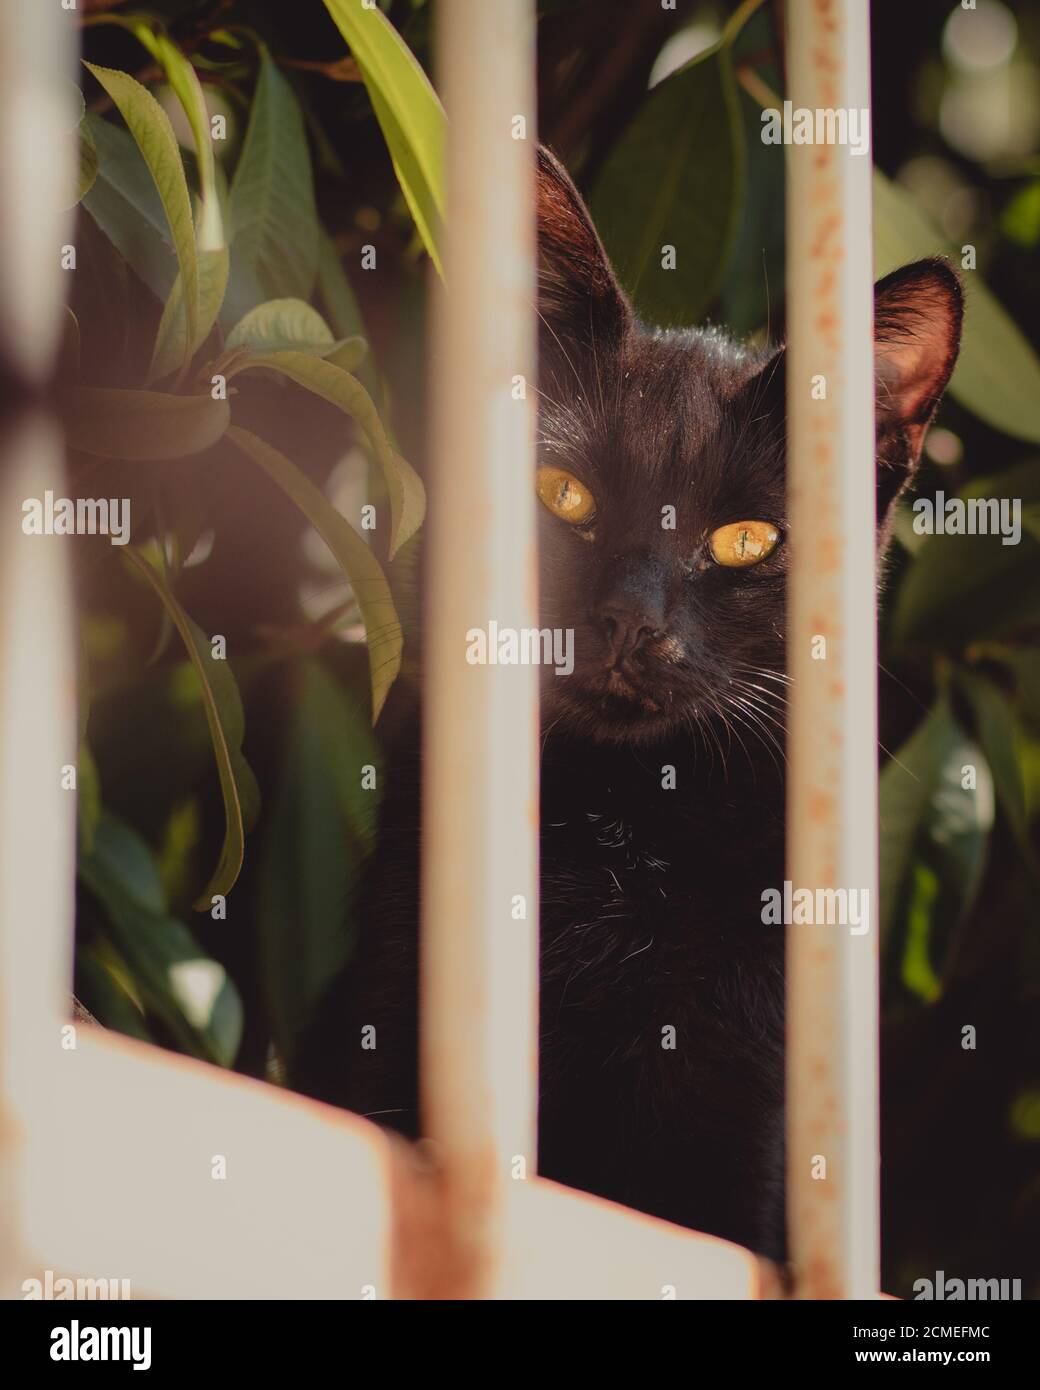 Cute small completely black cat with bright yellow eyes standing behind a fence, looking straight at the camera Stock Photo